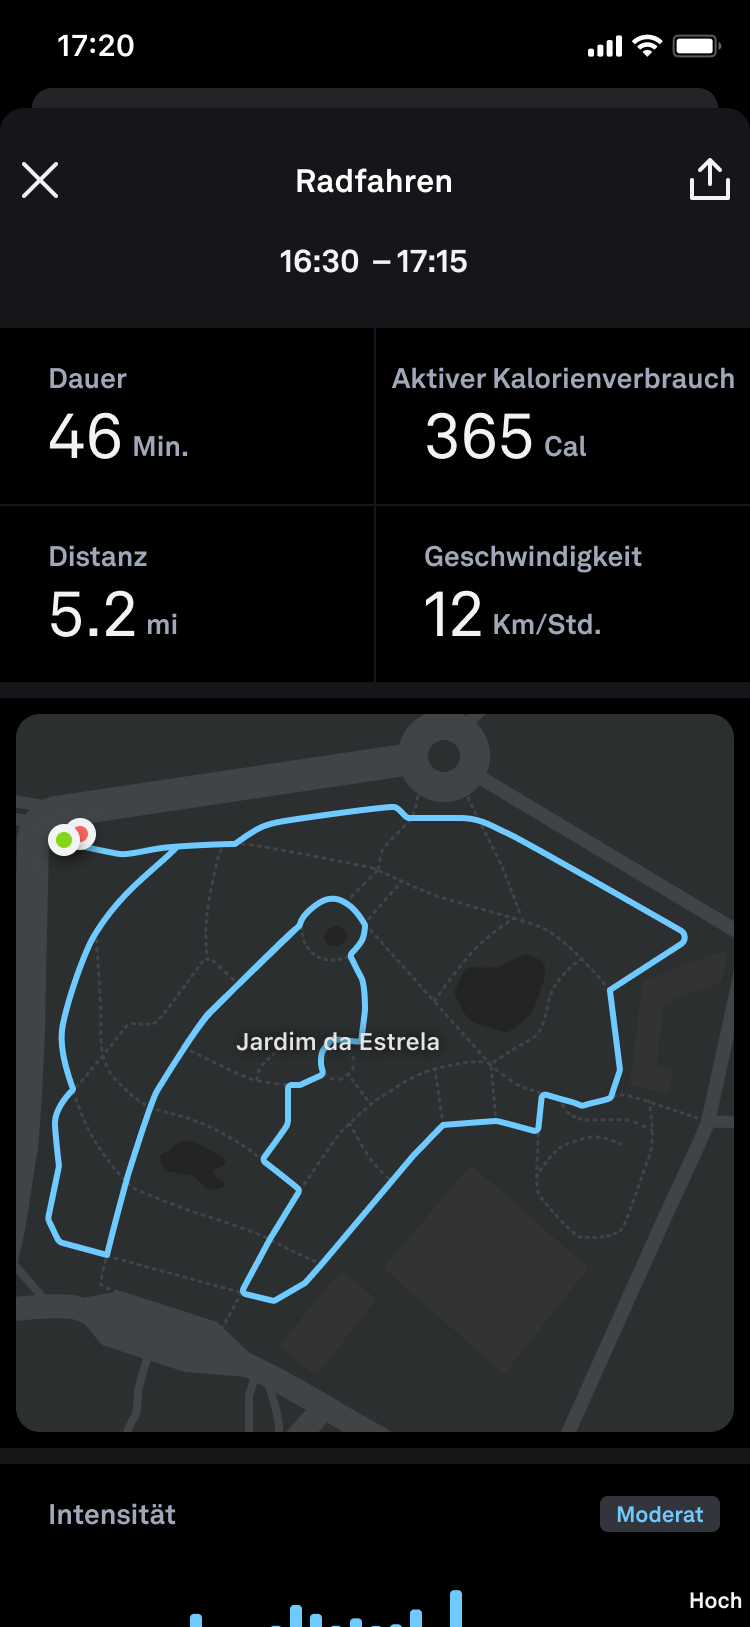 a picture of a phone. the phone's screen displays details of a cycling workout including: time, duration, active calorie burn, distance, speed, and a map of the route taken